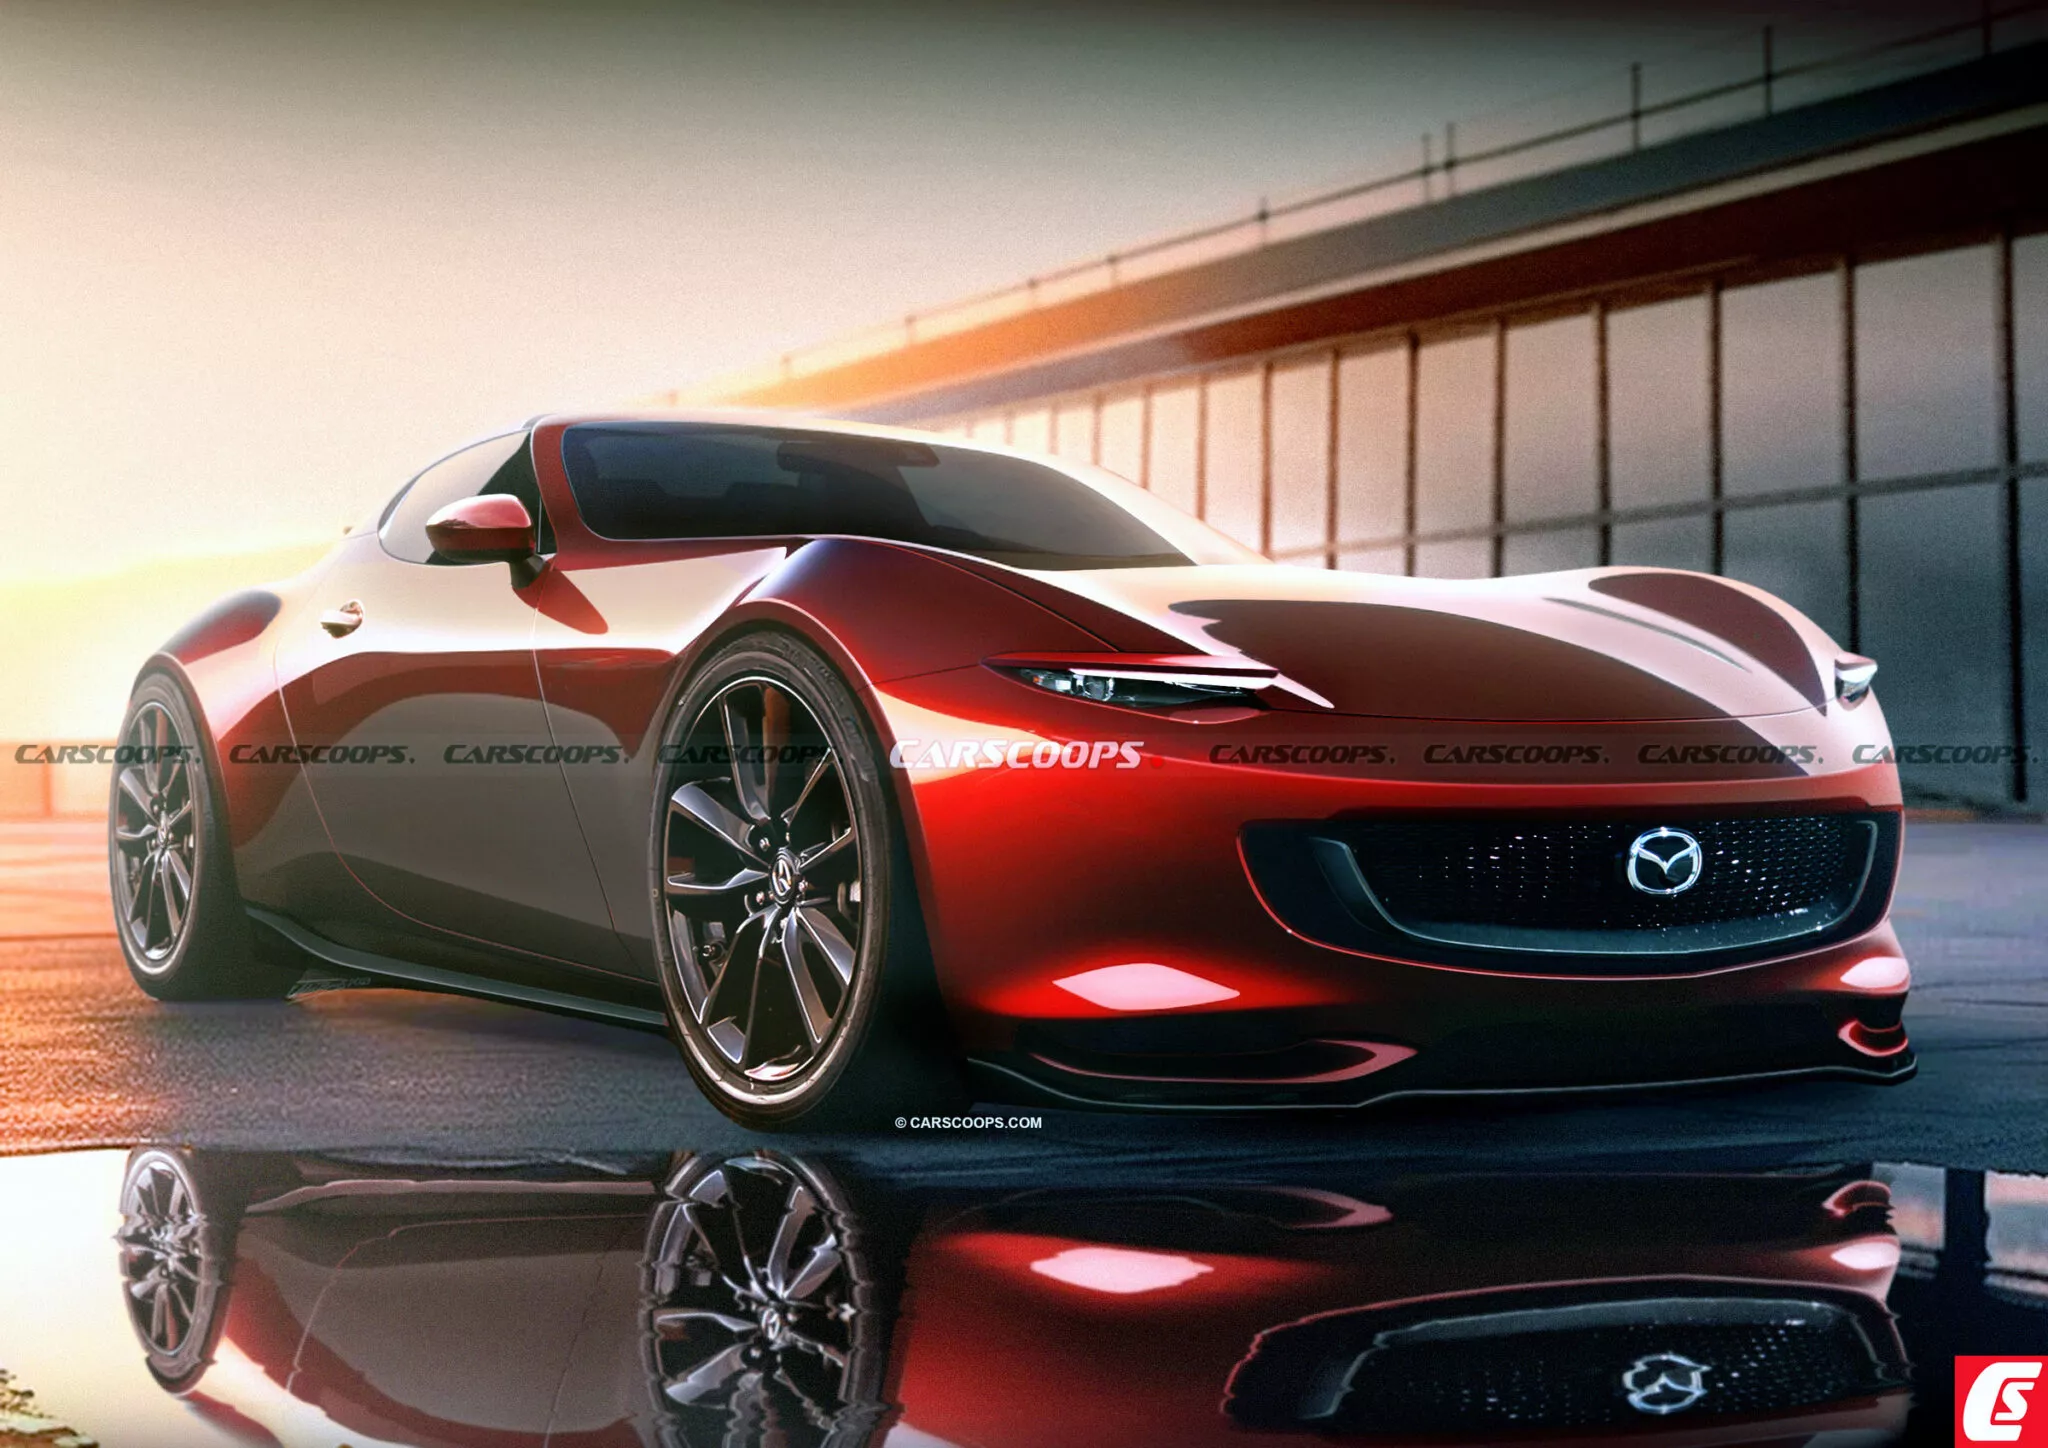 2025 Mazda MX-5 imagined with Iconic SP concept lines